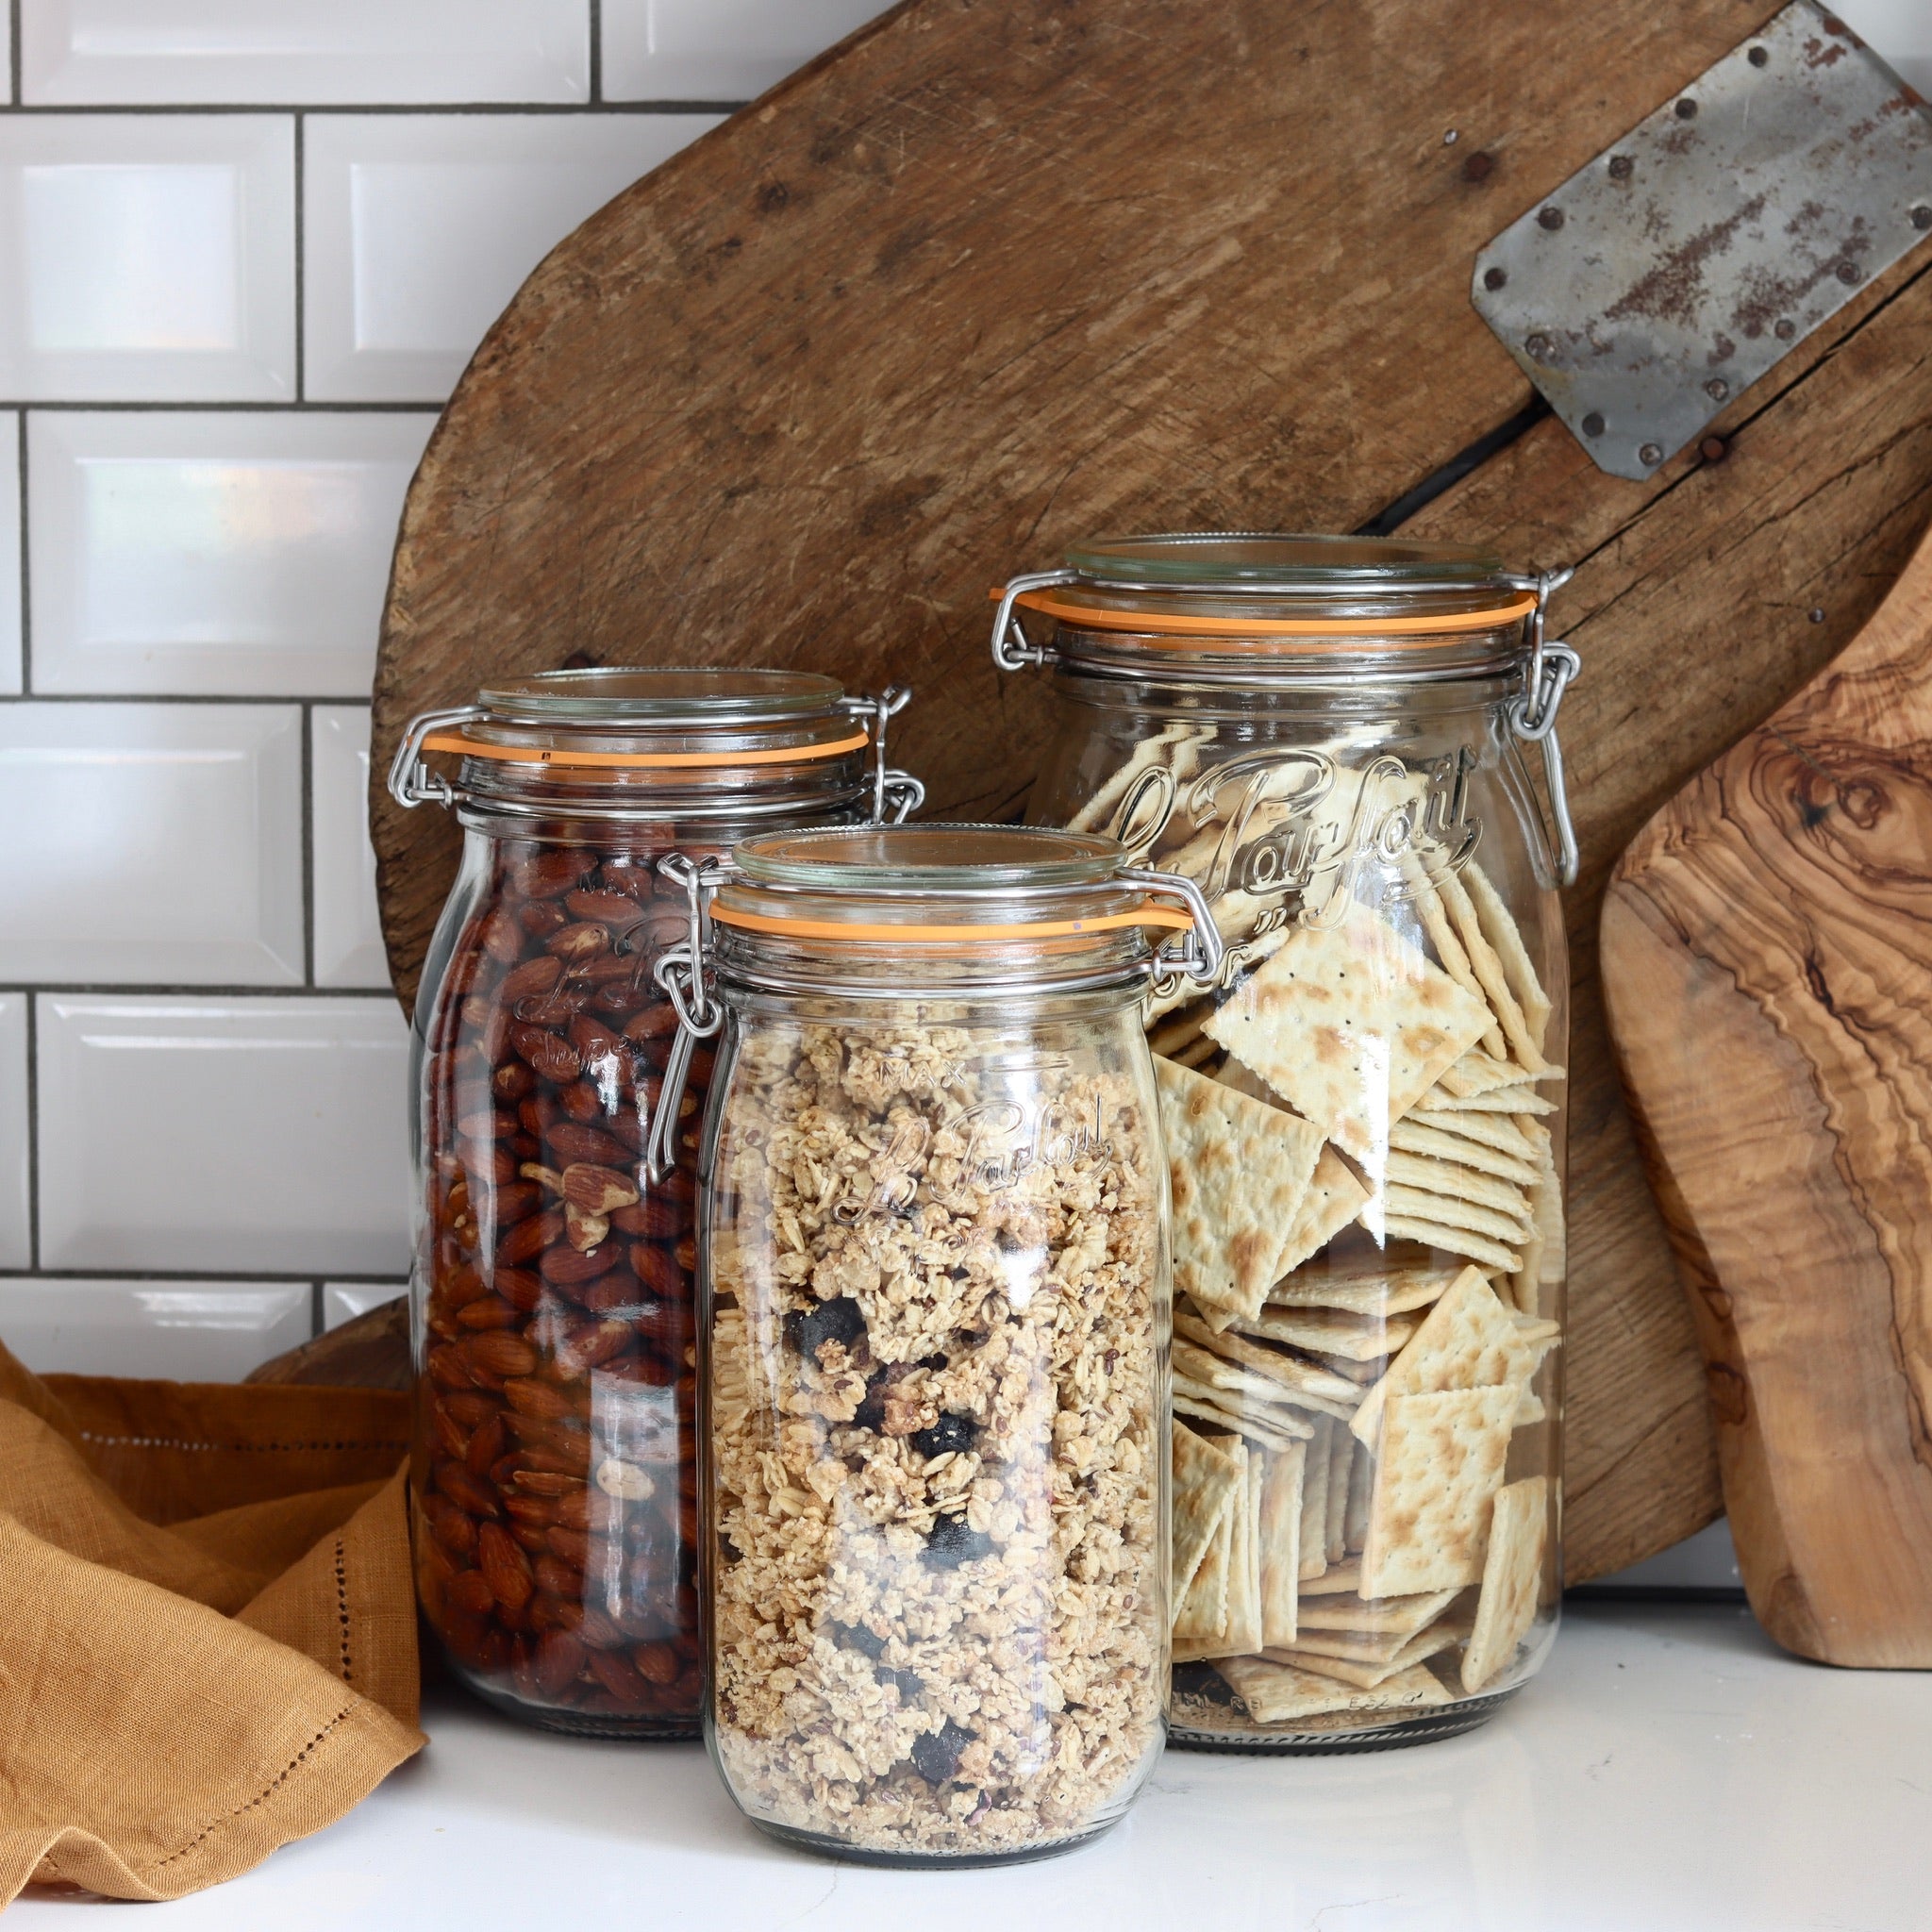 Glass Airtight Jars with Wooden Lid and Handle